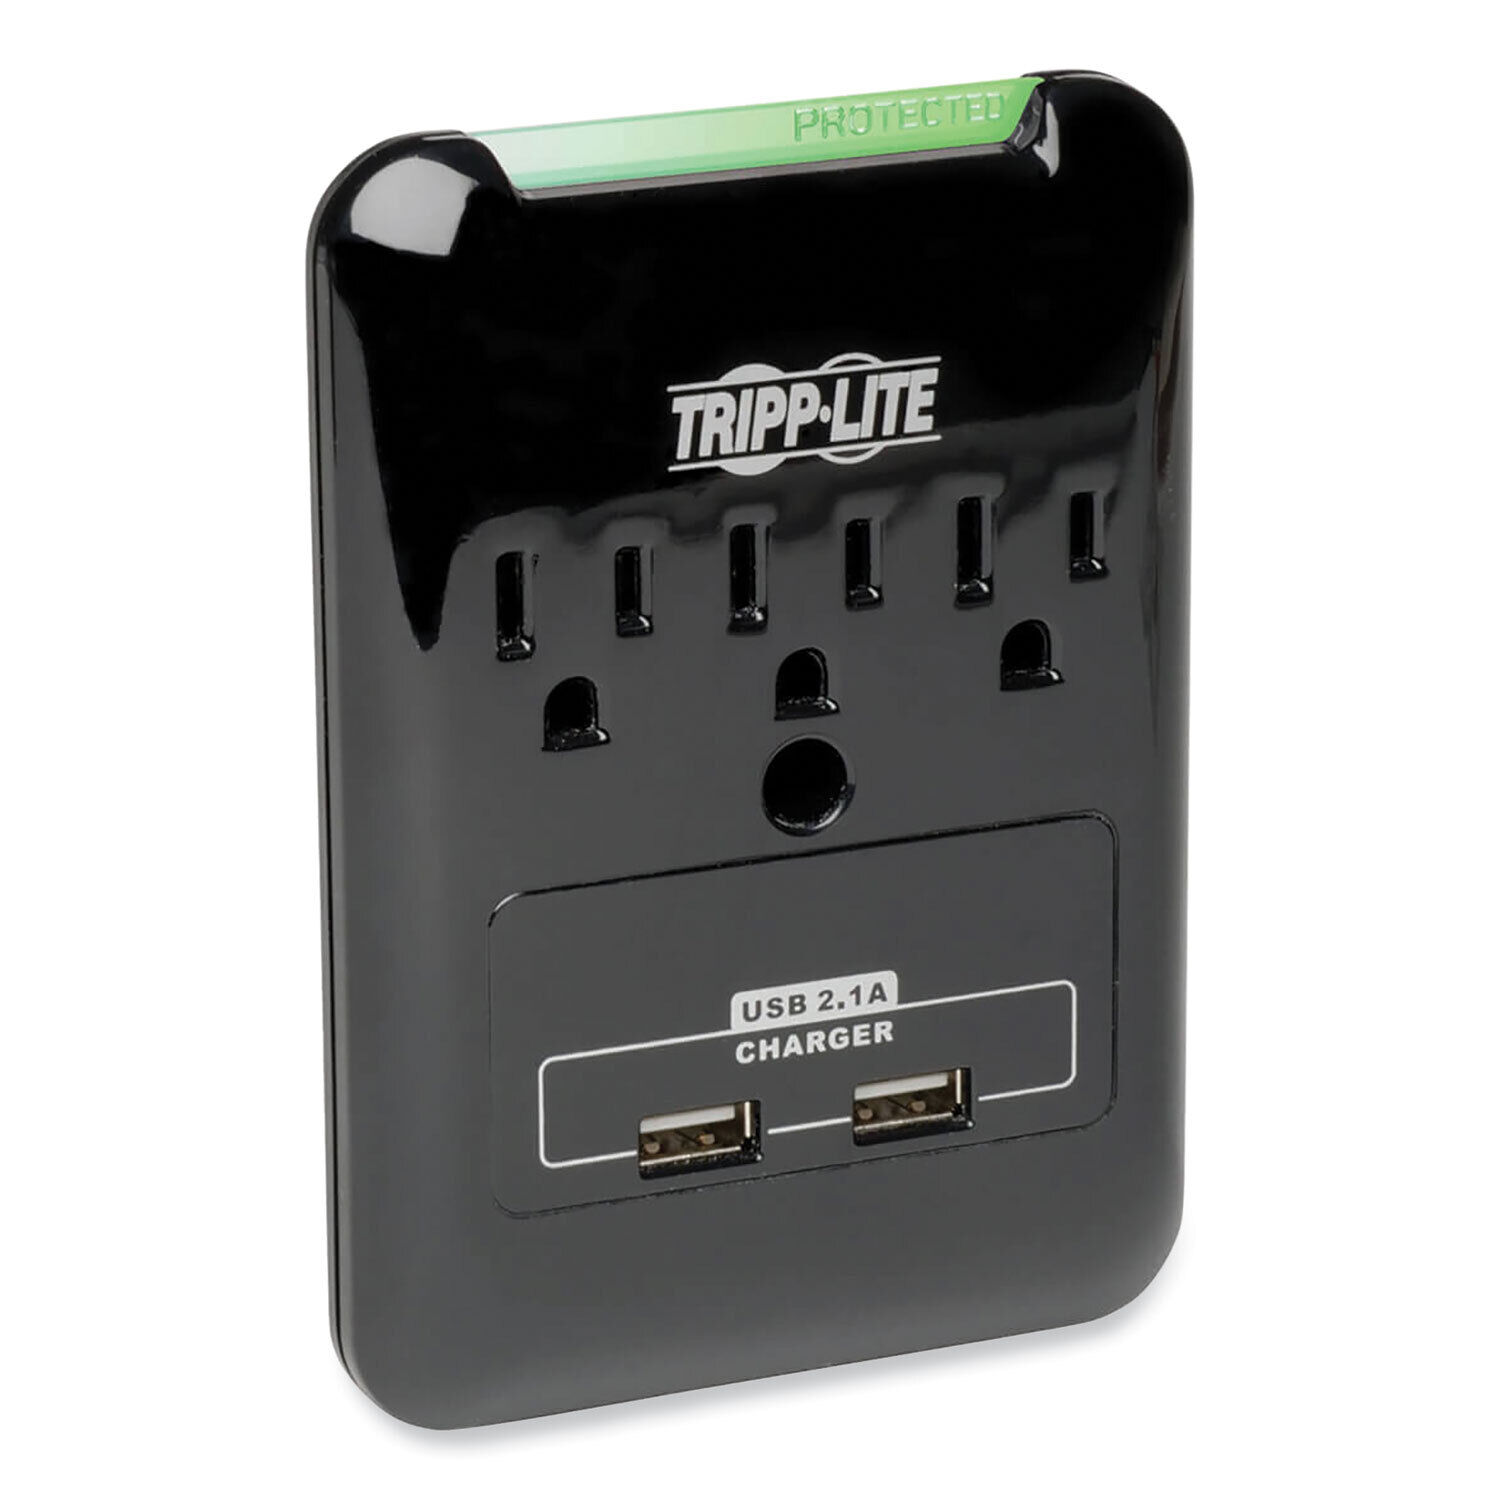 Tripp Lite Protect It 3-Outlet Surge Protector w/ 2 USB Ports, 540 Joules